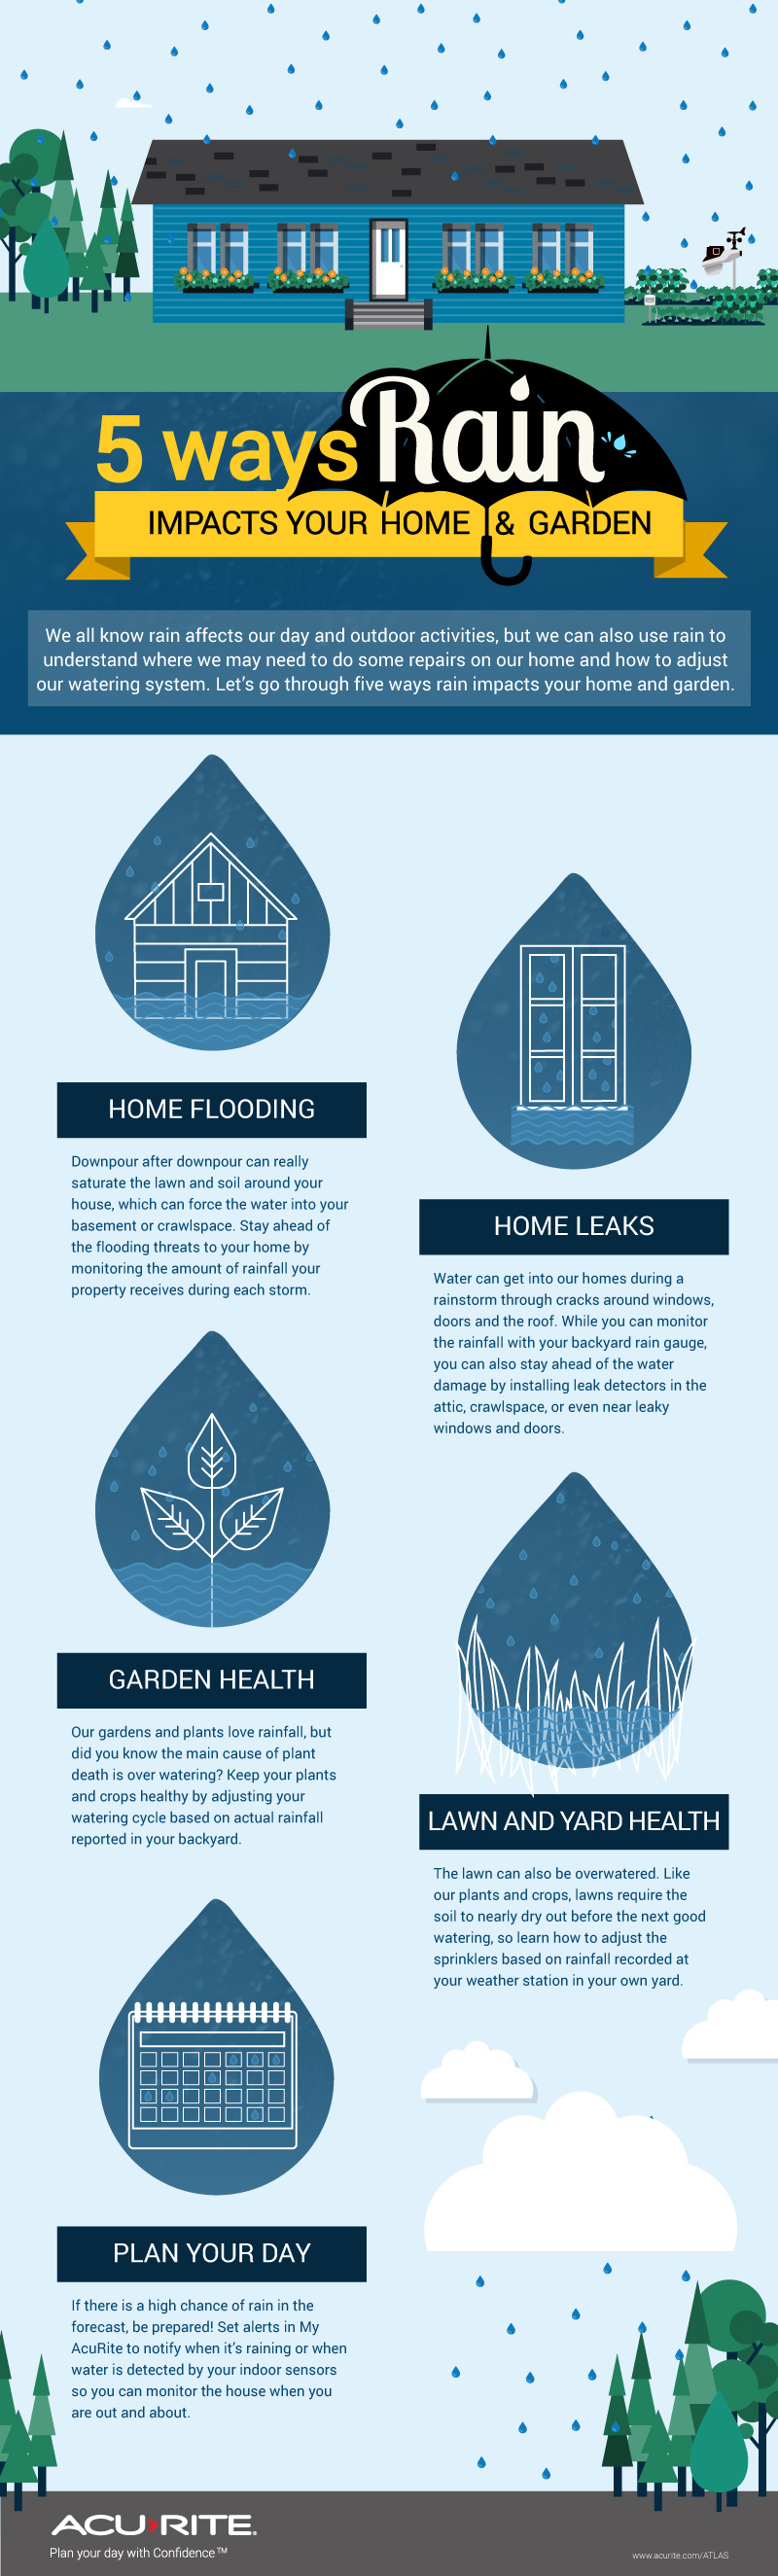 5 ways rain impacts your home and garden